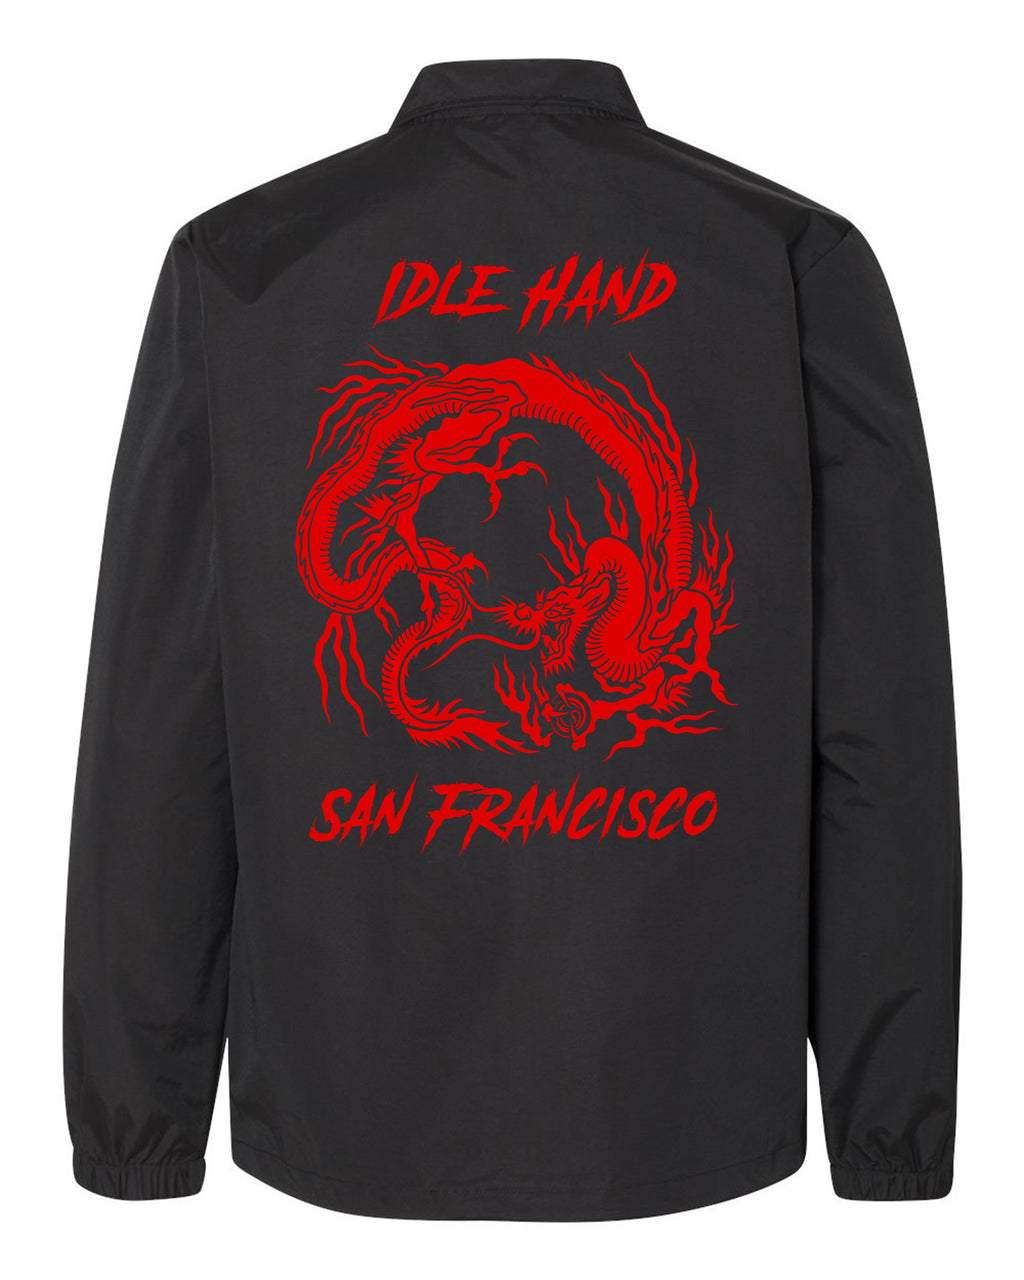 Back of Idle Hand Coaches jacket with Red Dragon design and the words Idle Hand at the top, San Francisco at the bottom.